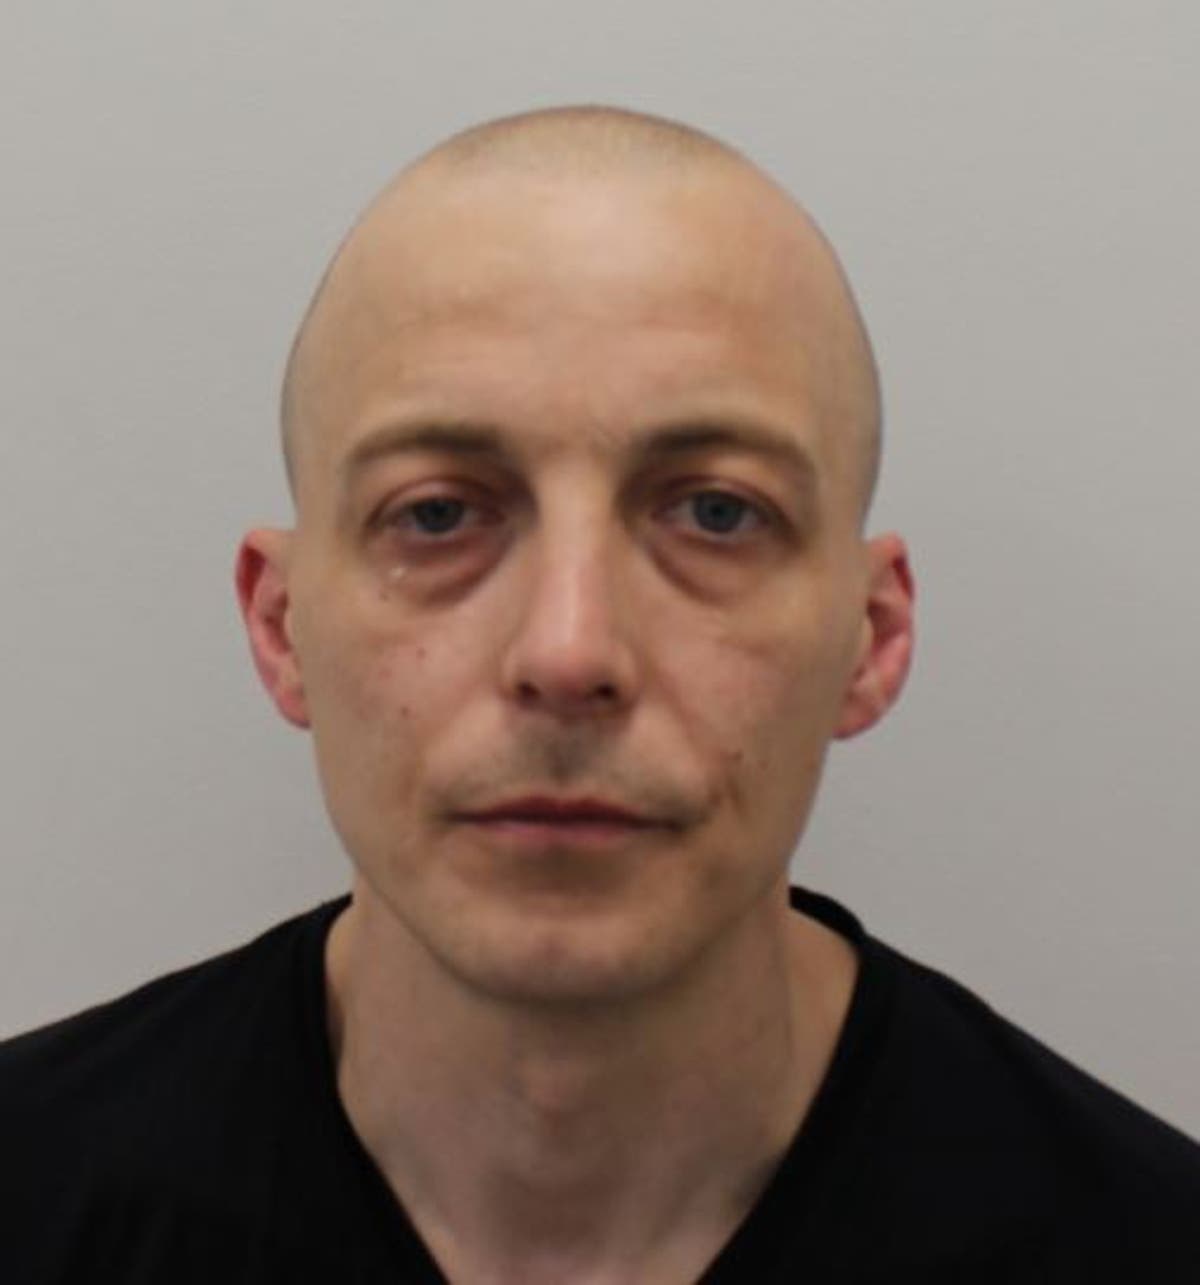 Police hunt convict who fled from mental health workers in Ealing